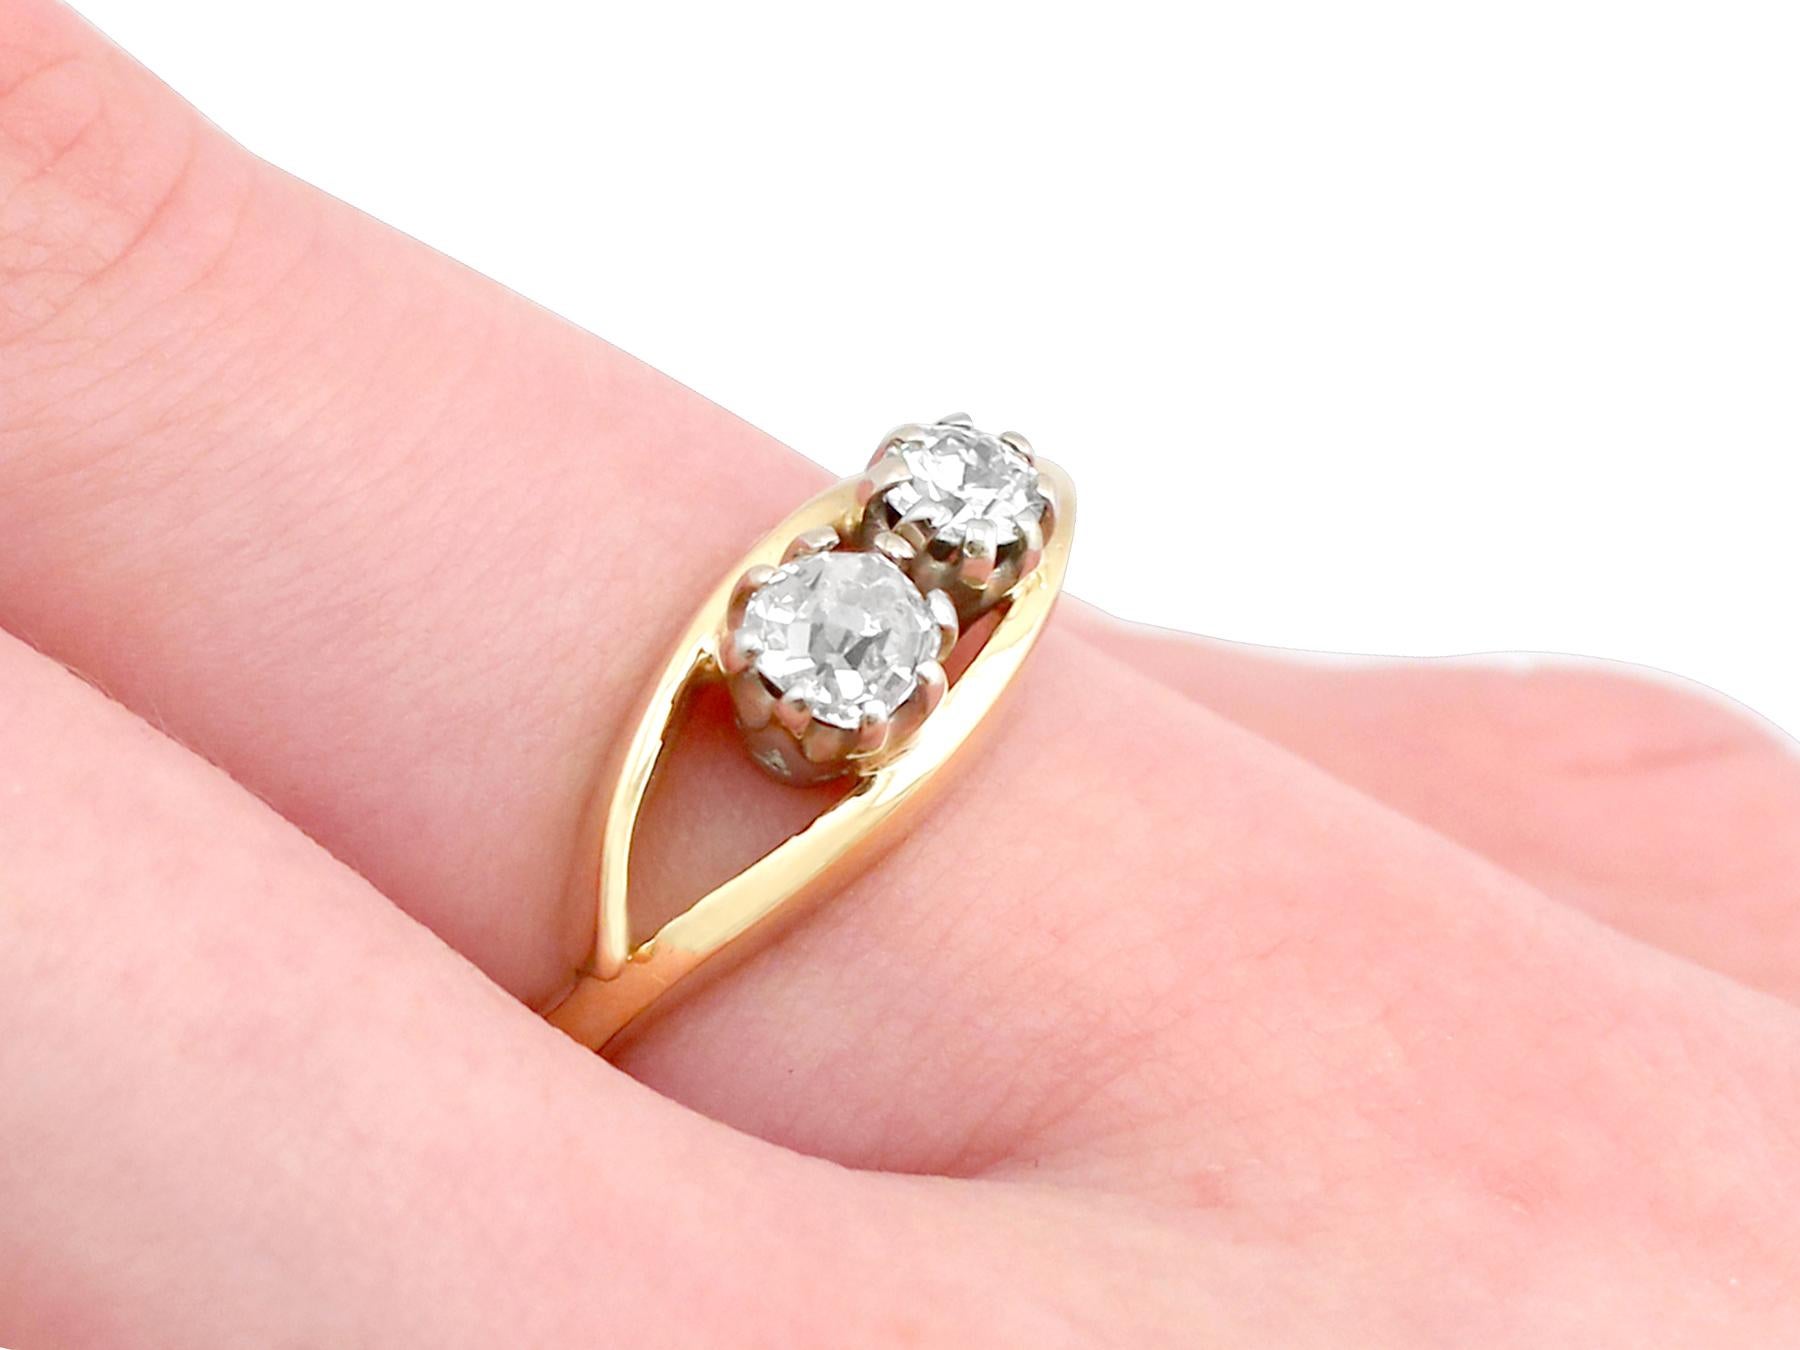 1910s Antique Diamond Yellow Gold Cocktail Ring For Sale 3